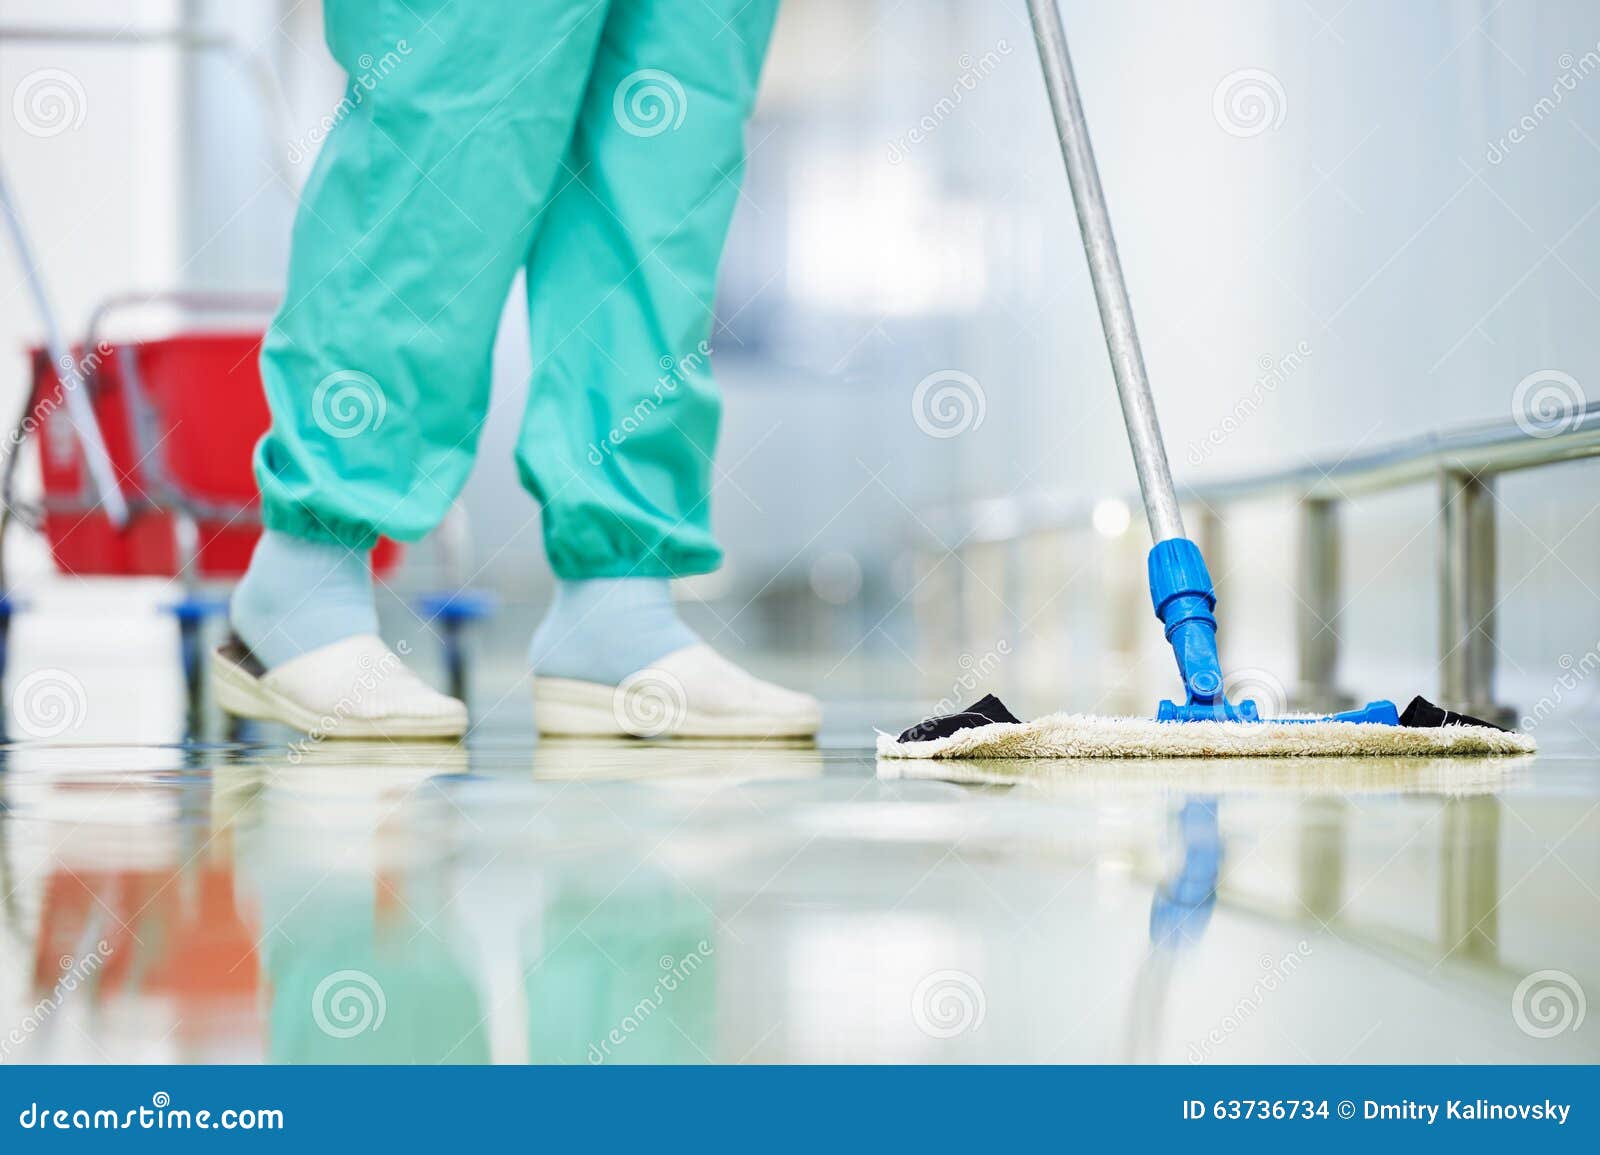 worker cleaning floor with mop